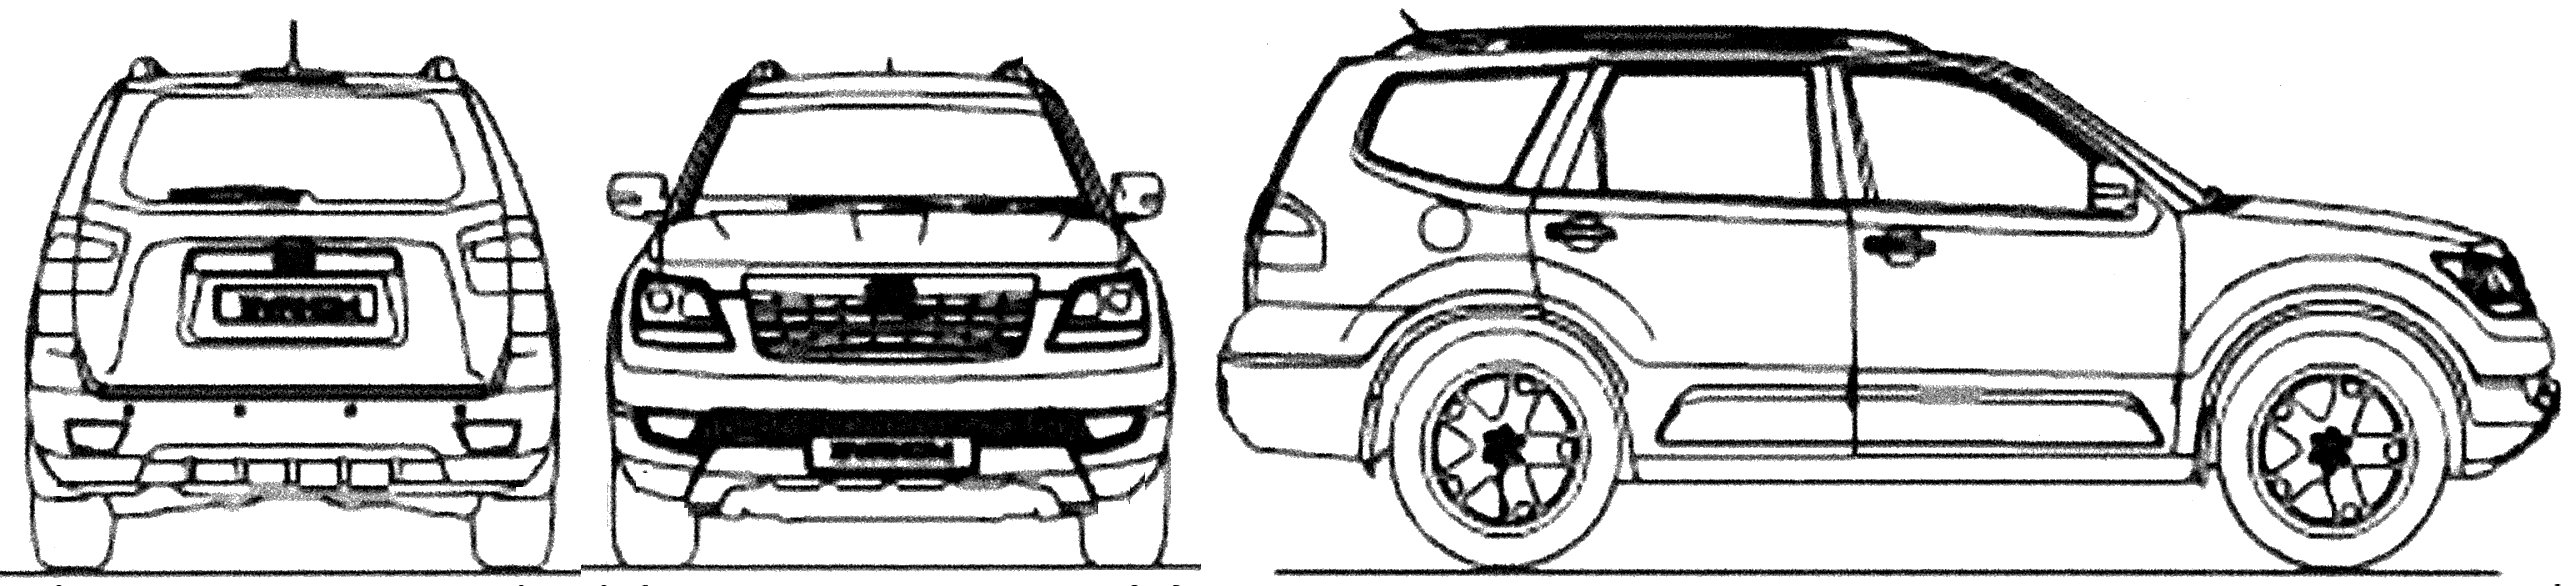 2009-kia-mohave-suv-blueprints-free-outlines